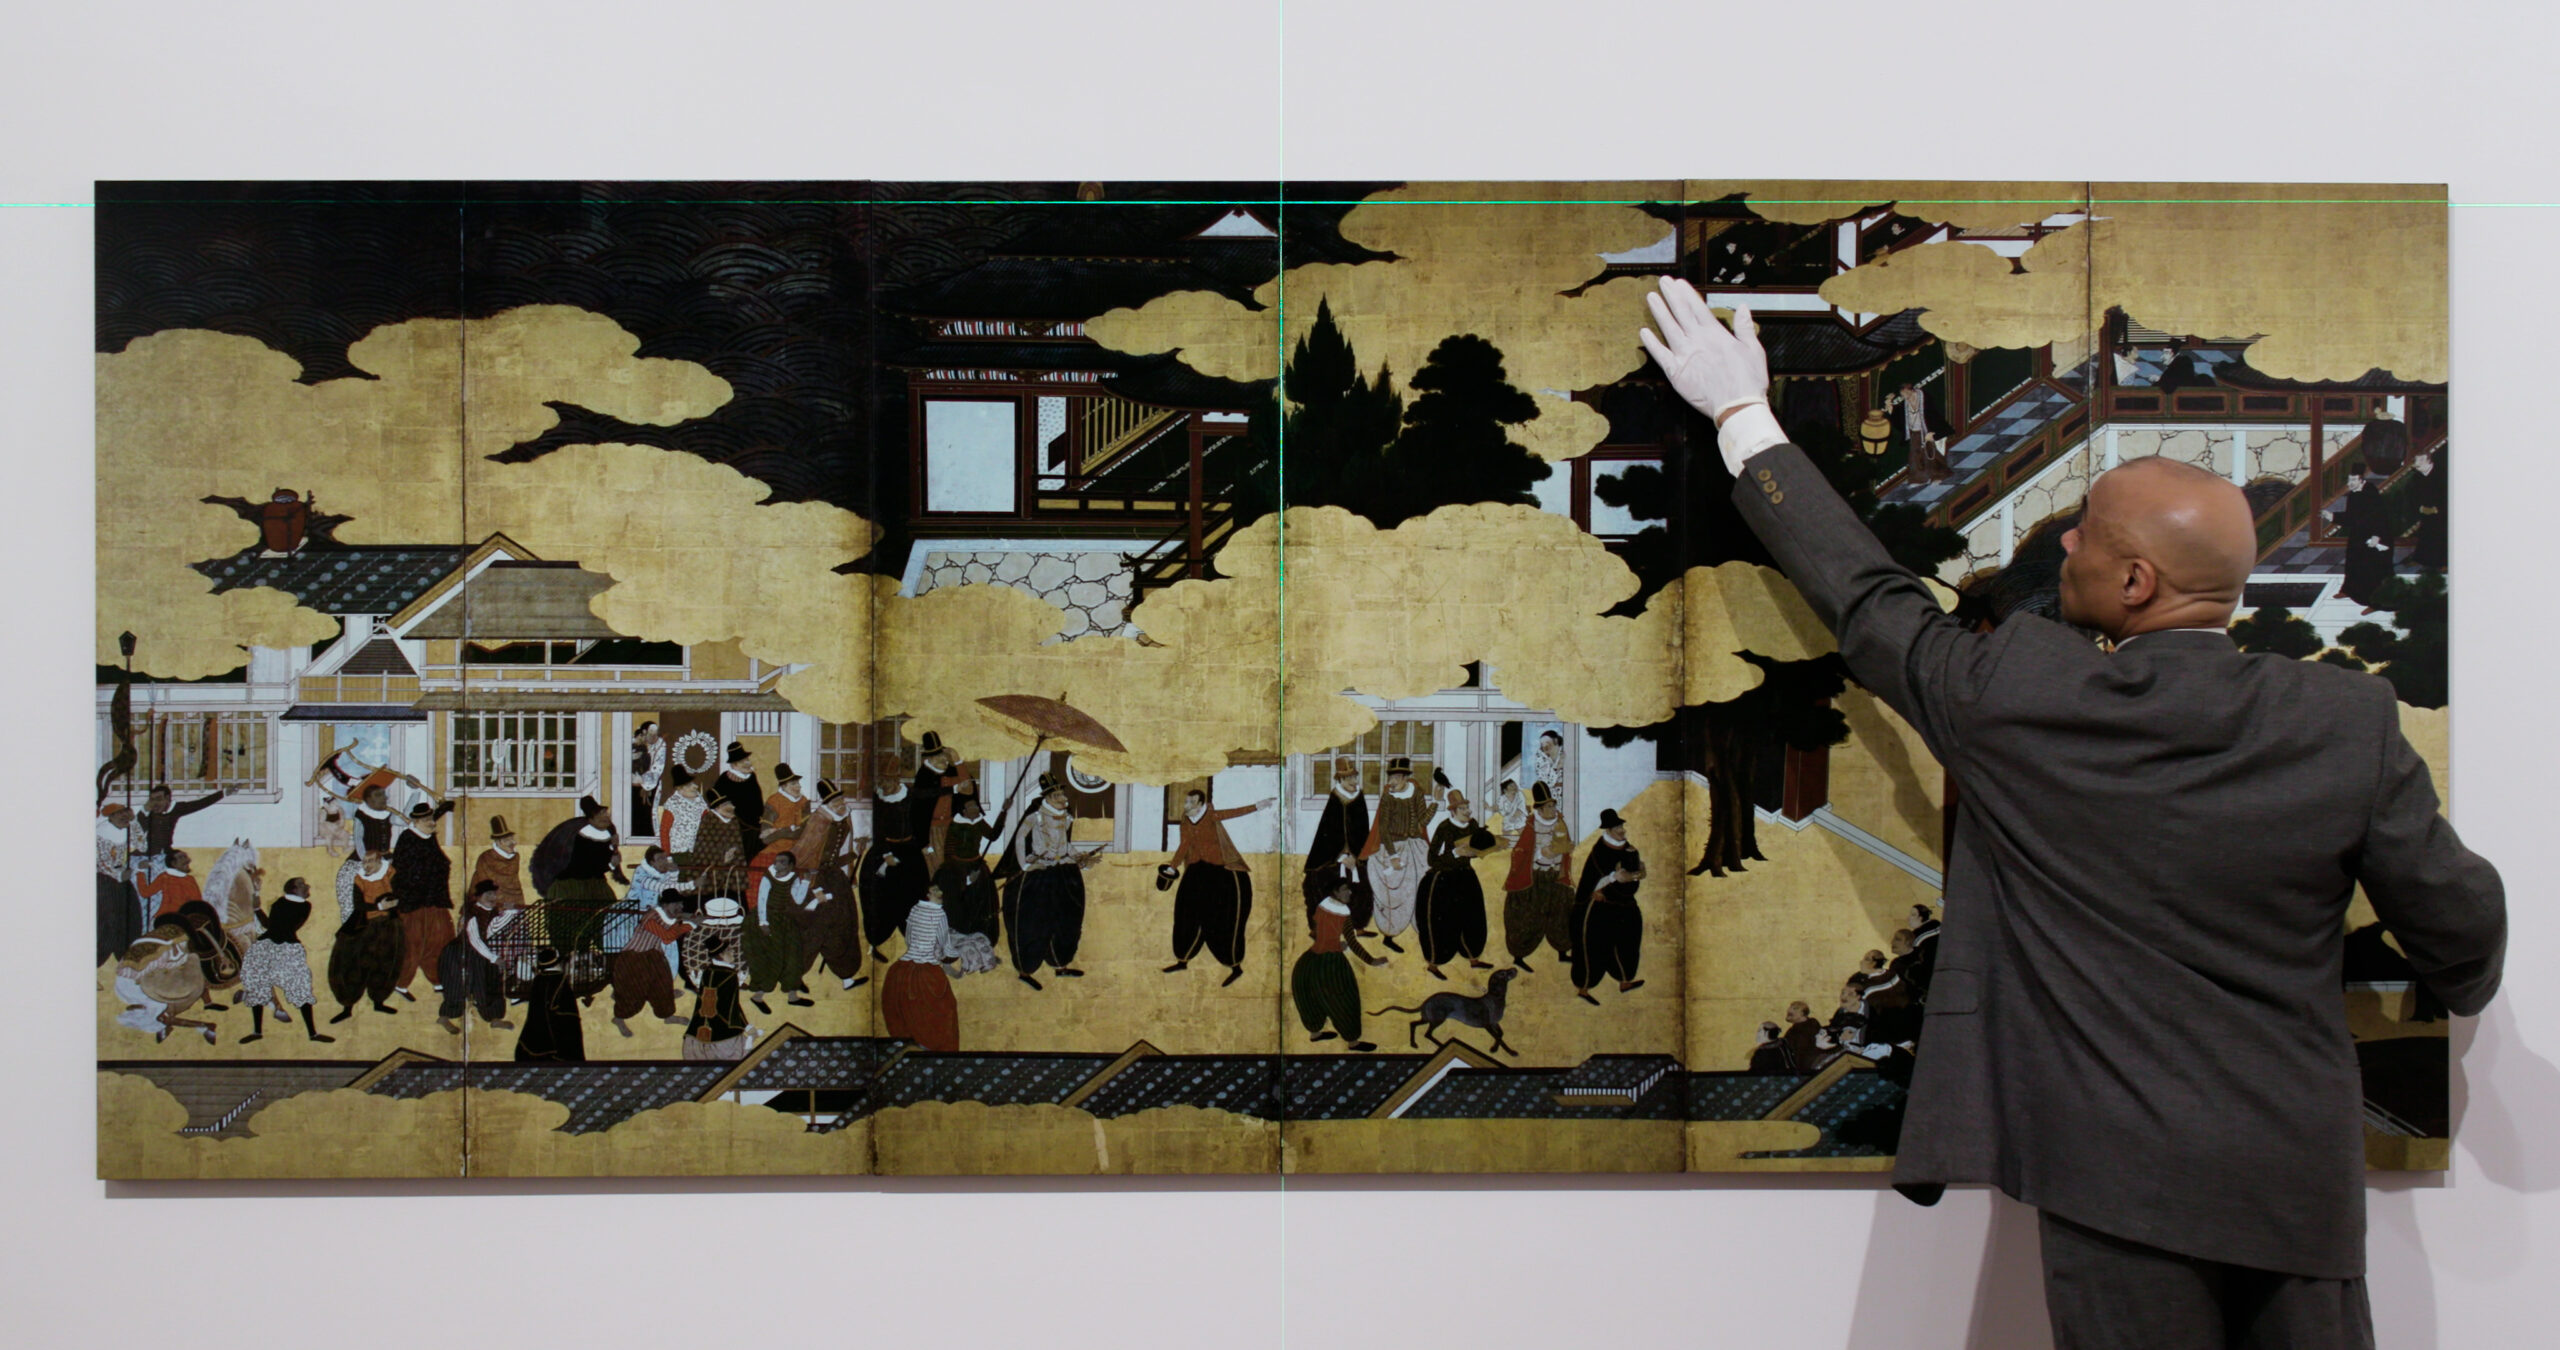 Peter Golightly in a suit, wearing a white glove on his left hand, is stretching his left arm to adjust the top right side of a painting, which consists of six panels. The painting is a photographic copy by Ikkō Narahara, who was asked to produce a collection of his photo works capturing a 15-century Japanese style work, which depicts a procession of non-Japanese foreign visitors.